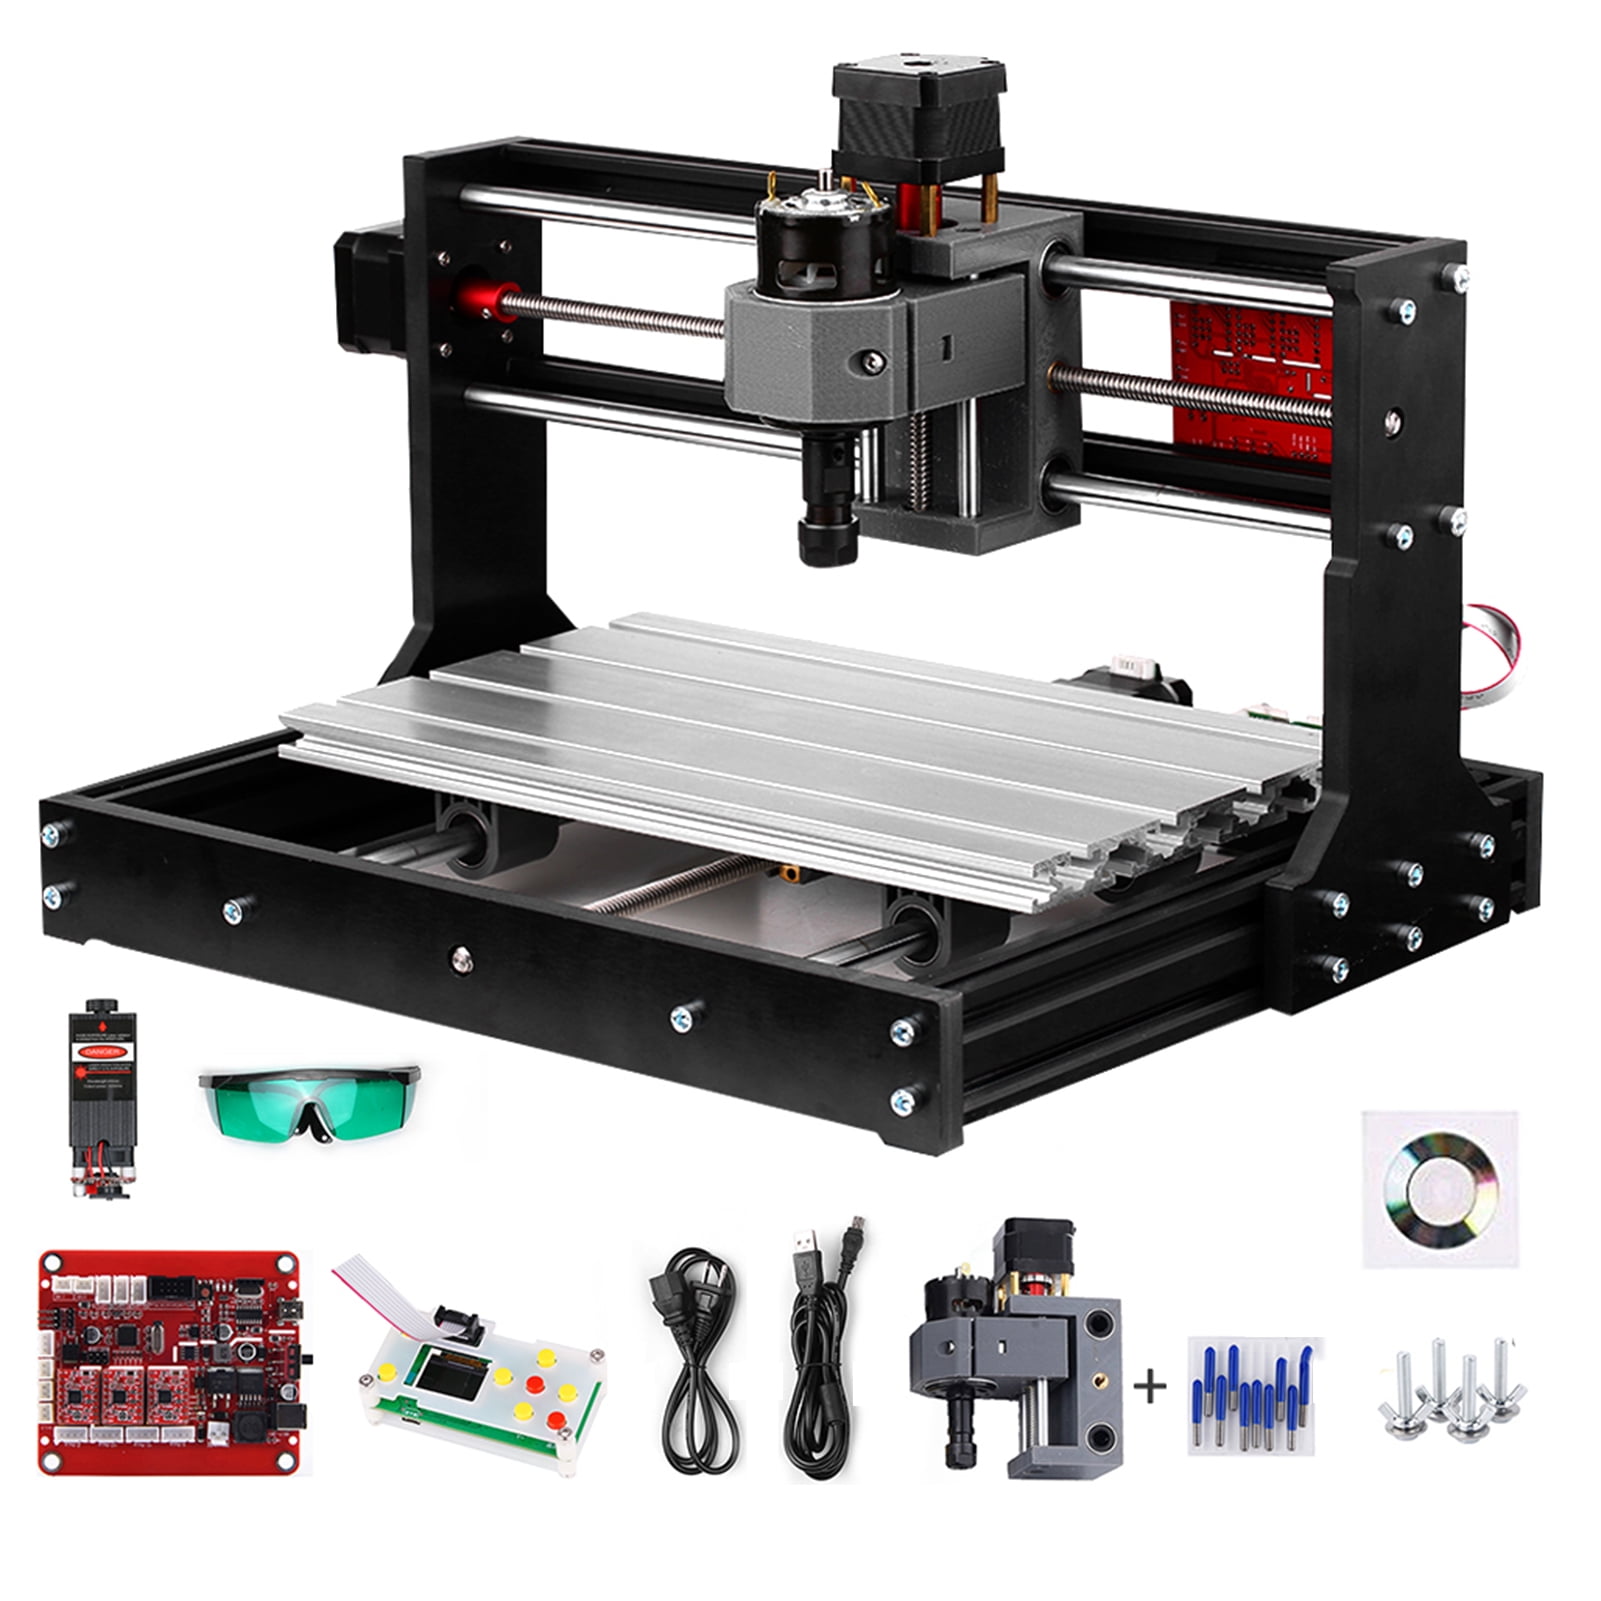 3 Axis CNC 1610 Router Engraver Wood Engraving PCB Milling Machine+500mW Laser 